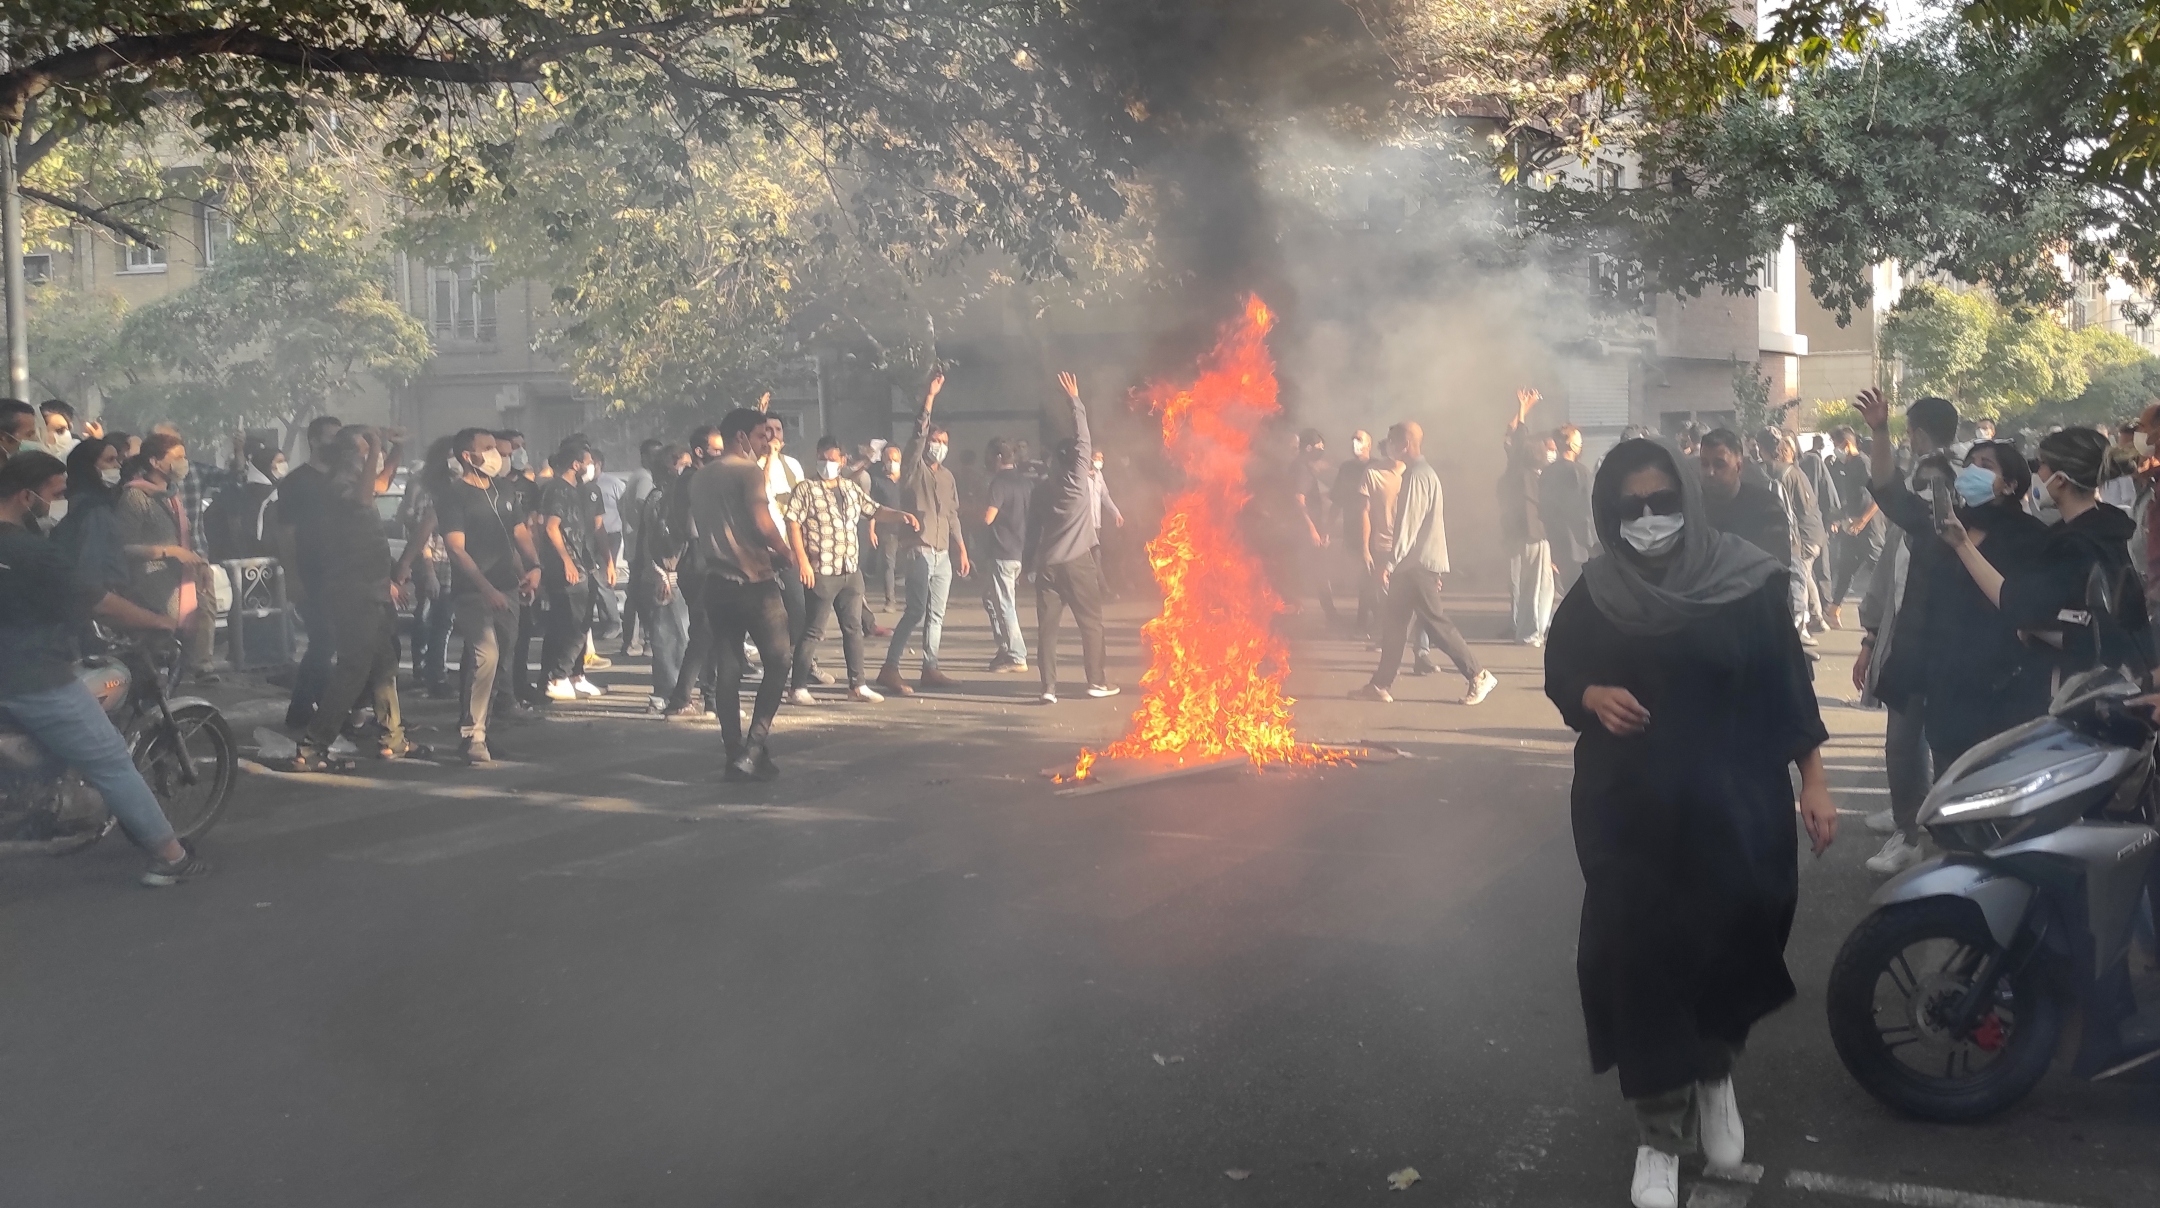 Iran’s Supreme Leader blames protests on Israel and US